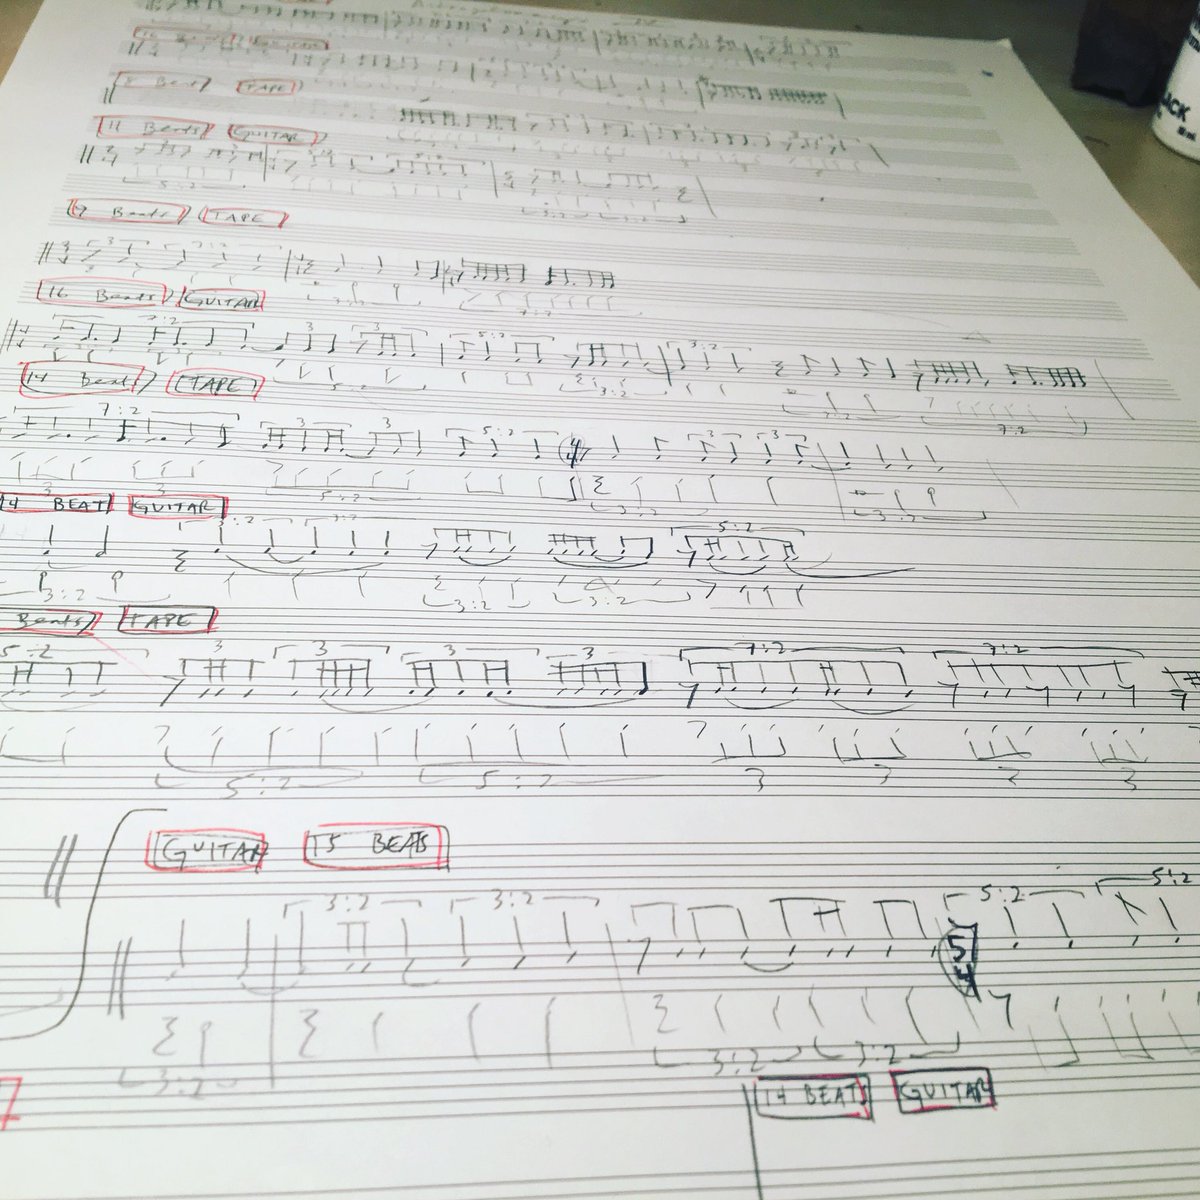 Part IV of my new piece Astrogalomancy just might kill me! #composing #classicalguitar #electronics #spectral #partials #overtones #polyrhythms #music #granularsynthesis #supercollider